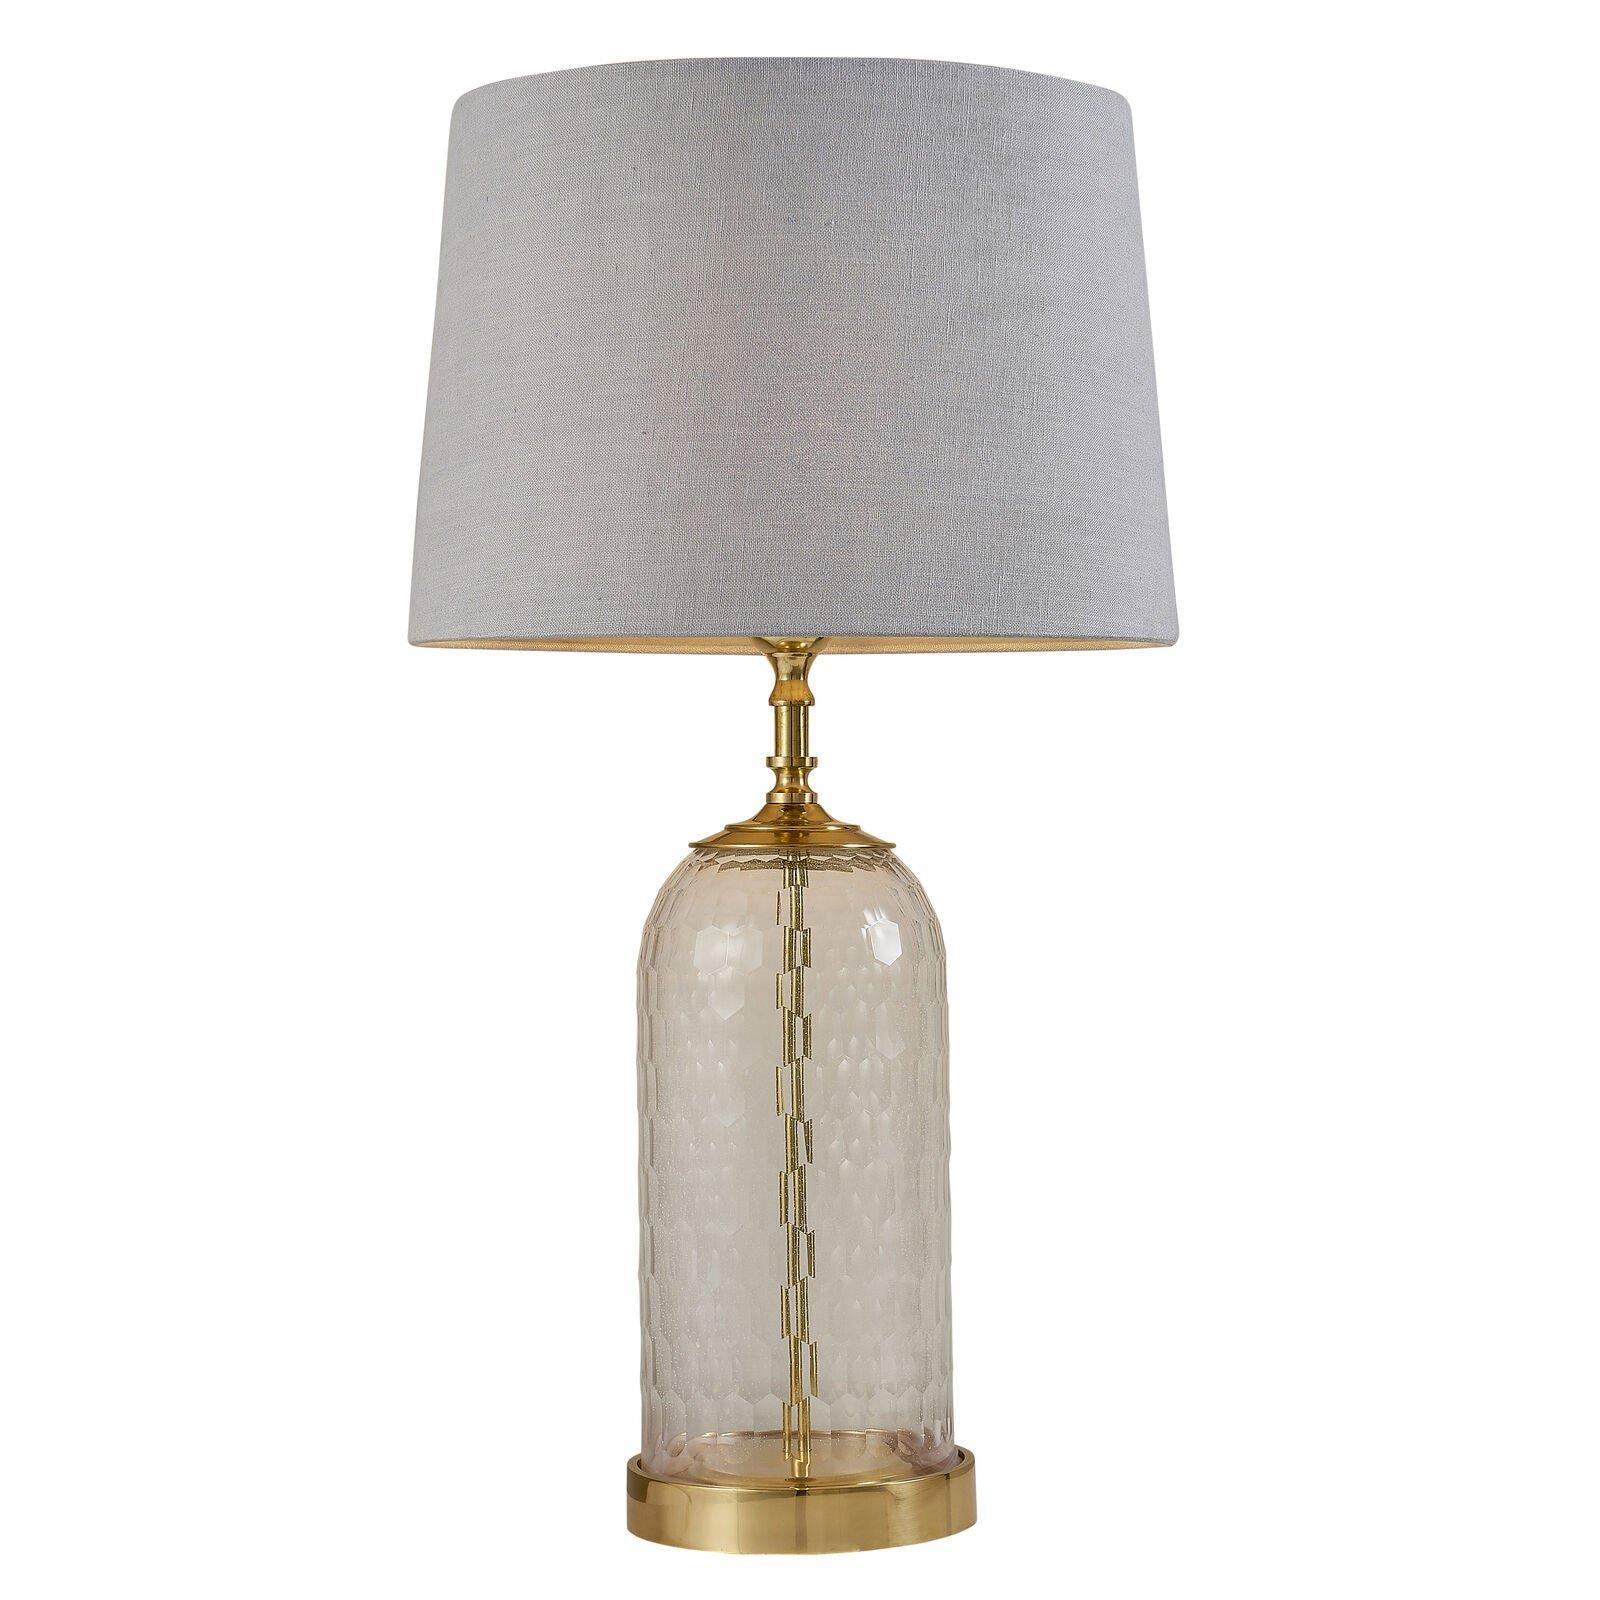 Table Lamp Solid Brass & Charcoal Linen 60W E27 GLS Base & Shade